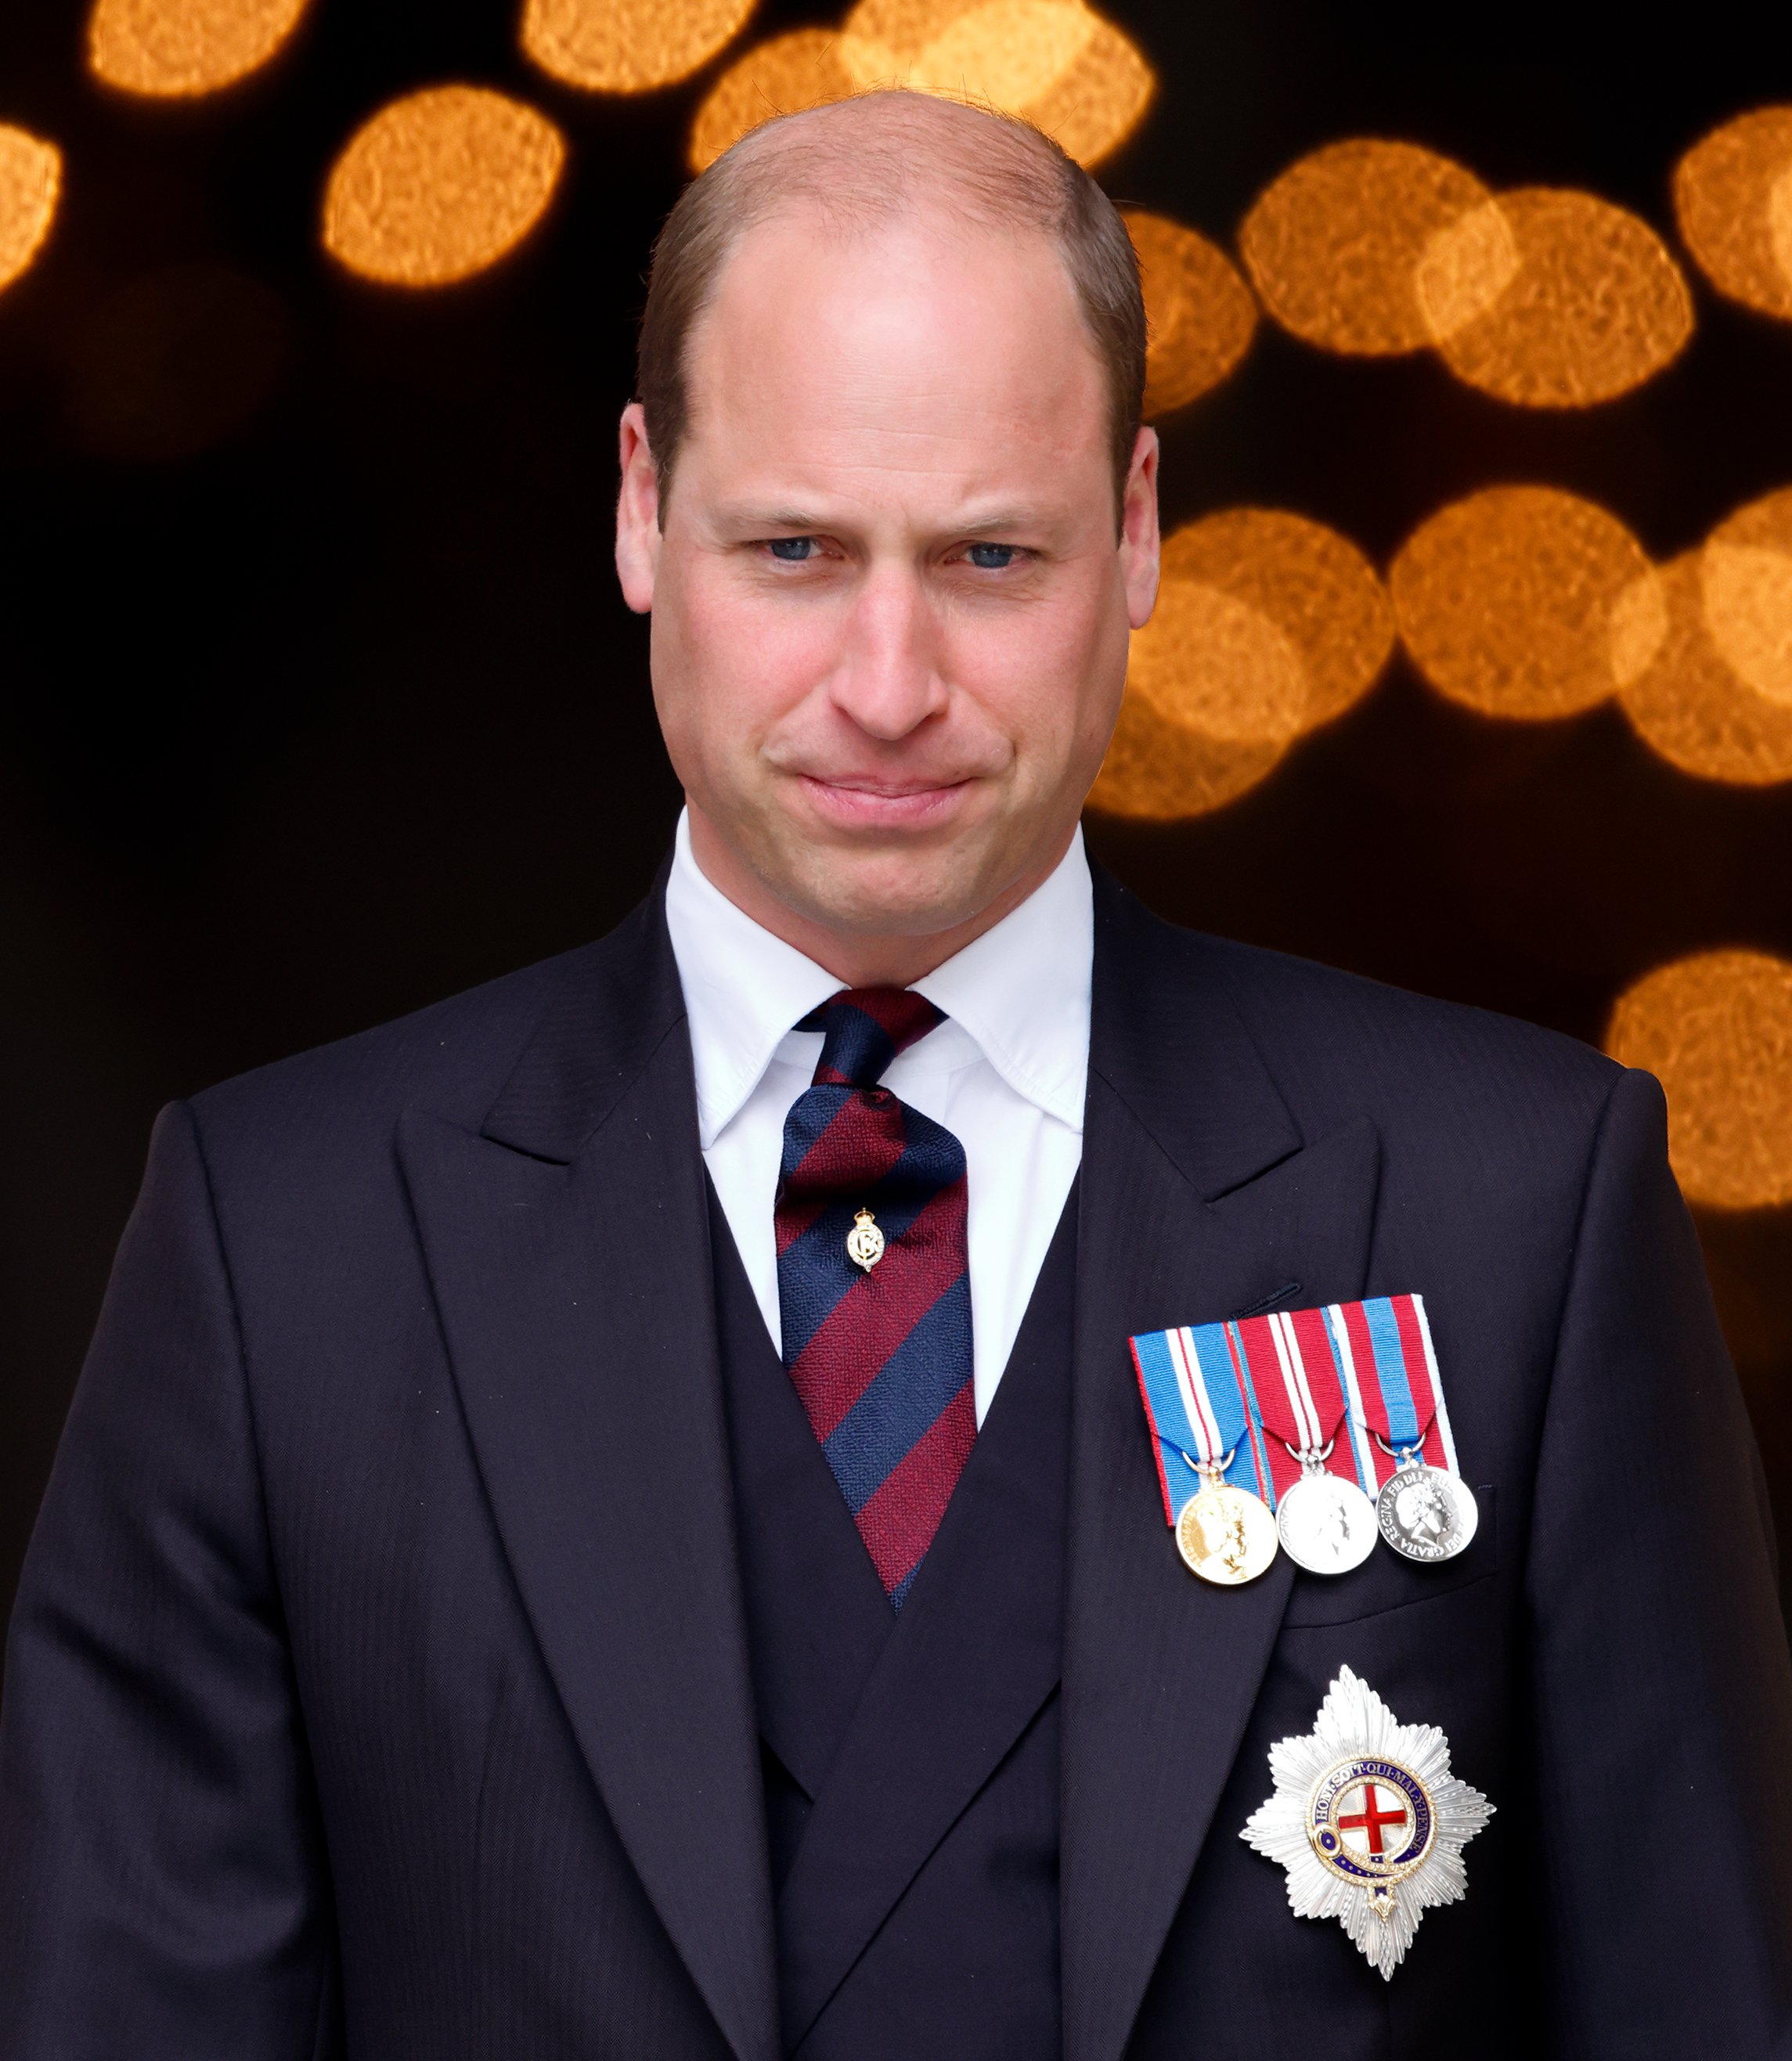 Prince William, Duke of Cambridge attends a National Service of Thanksgiving to celebrate the Platinum Jubilee of Queen Elizabeth II at St Paul's Cathedral on June 3, 2022 in London, England. | Source: Getty Images